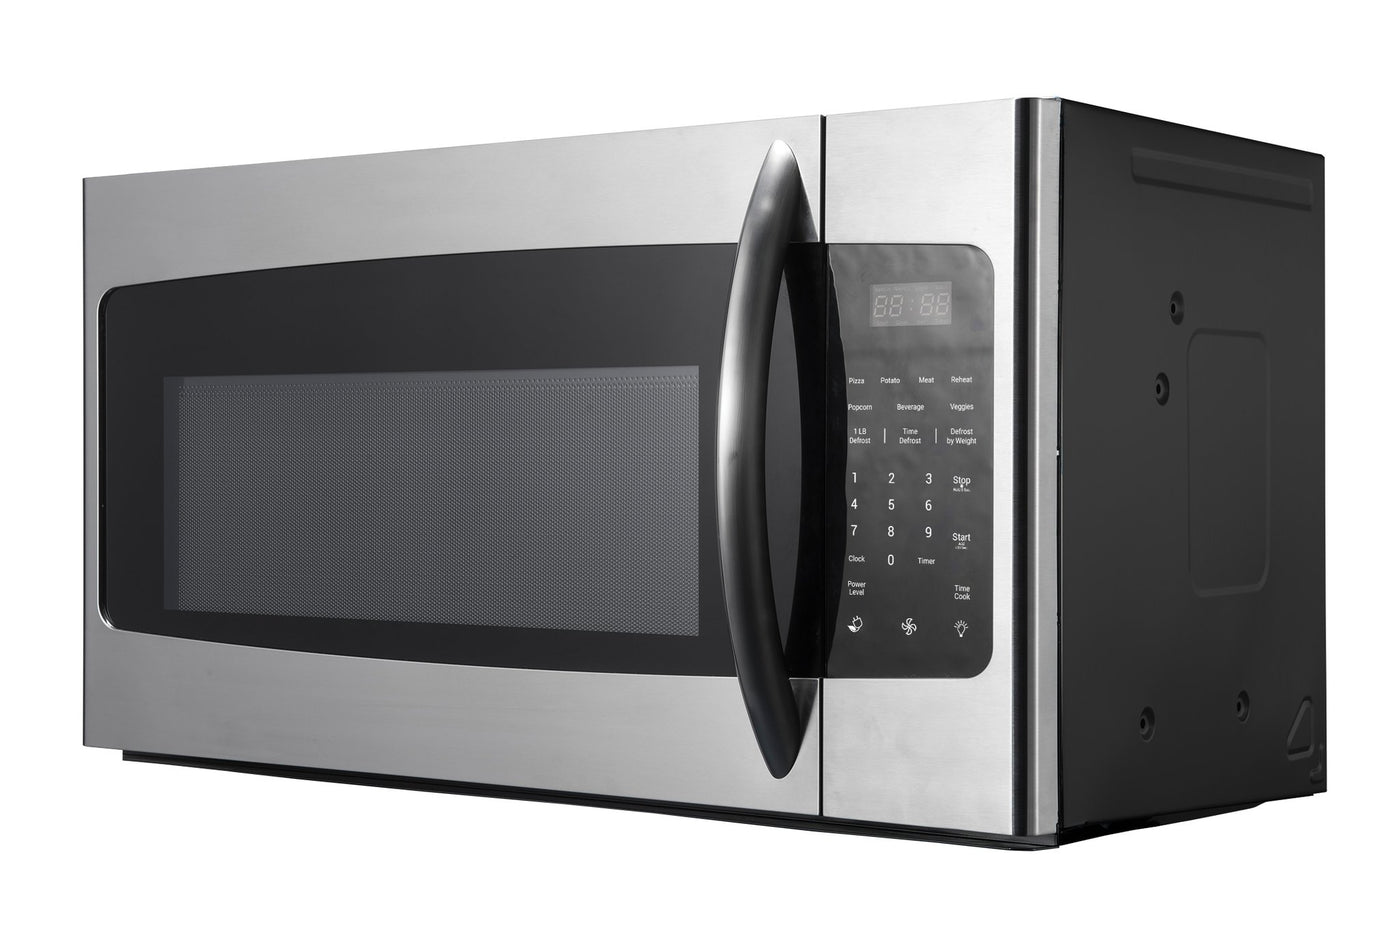 Danby DOM16A2SSDB Over Range Microwave, 1.6 Cu. Ft., 1000W, with 18-Month Warranty